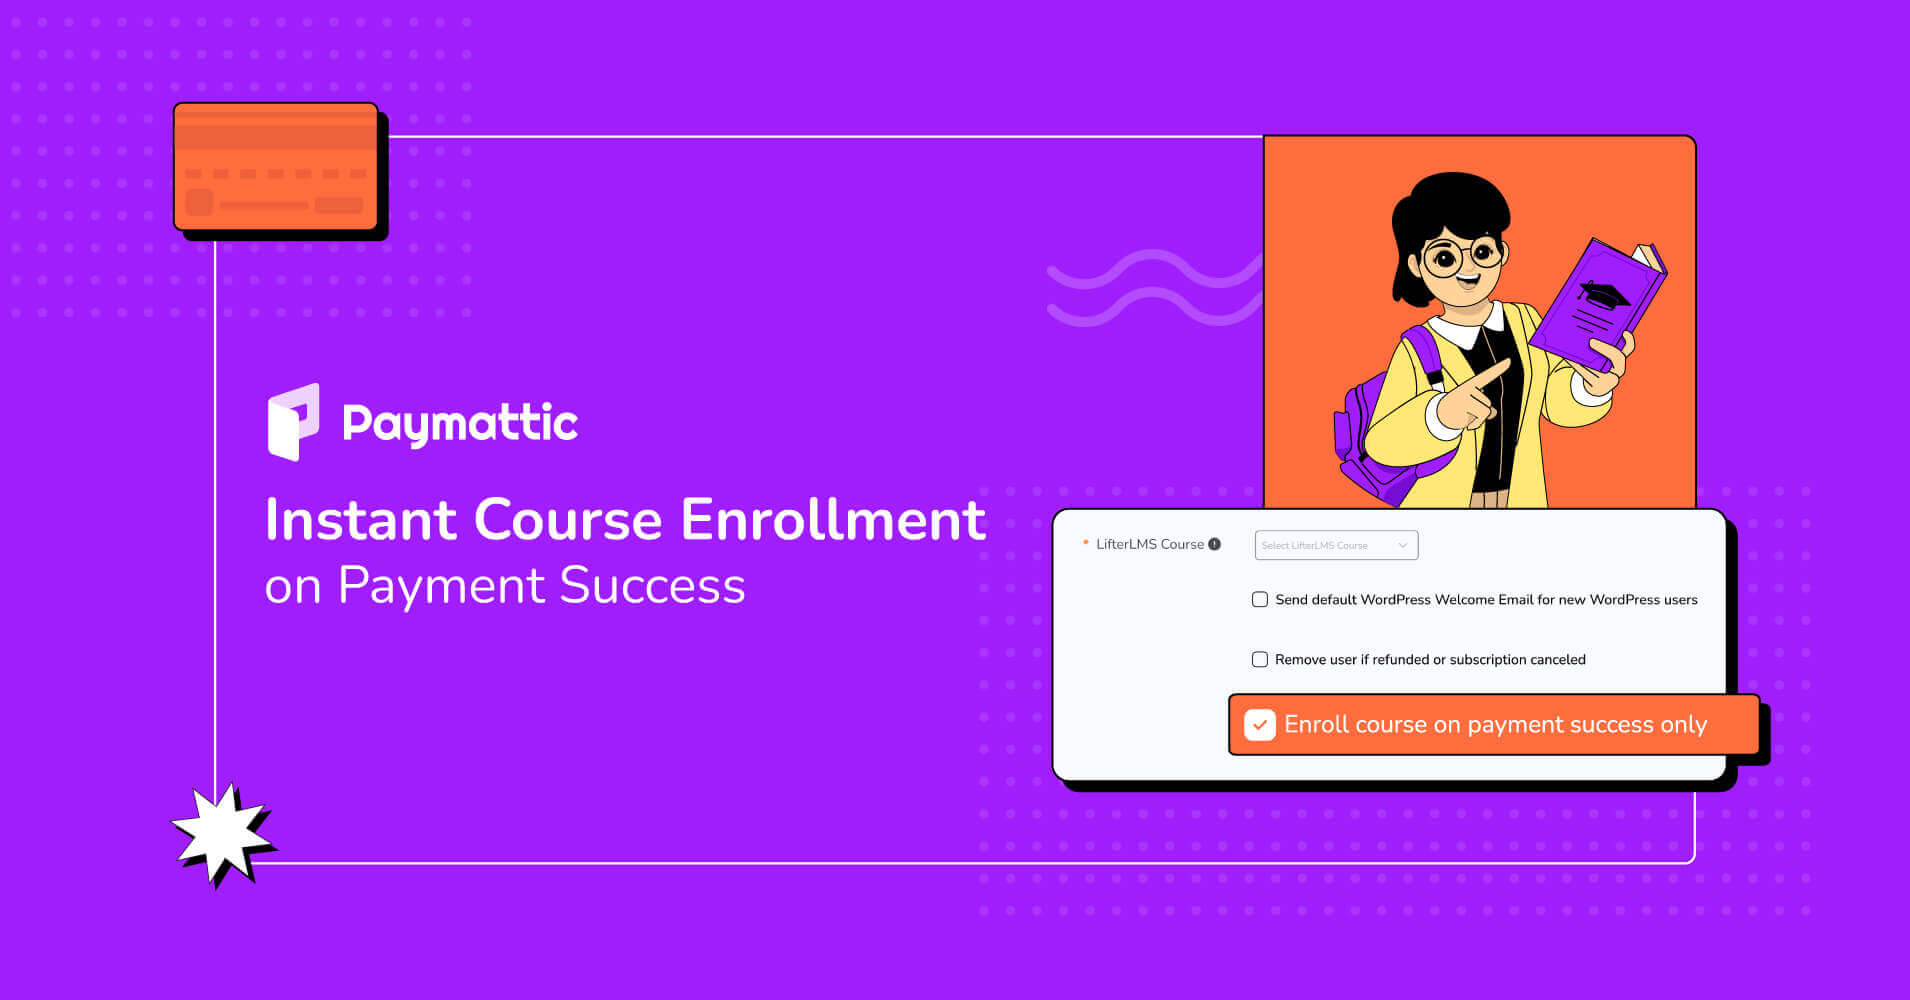 Instant Course Enrollment on Payment Success – Here’s How!